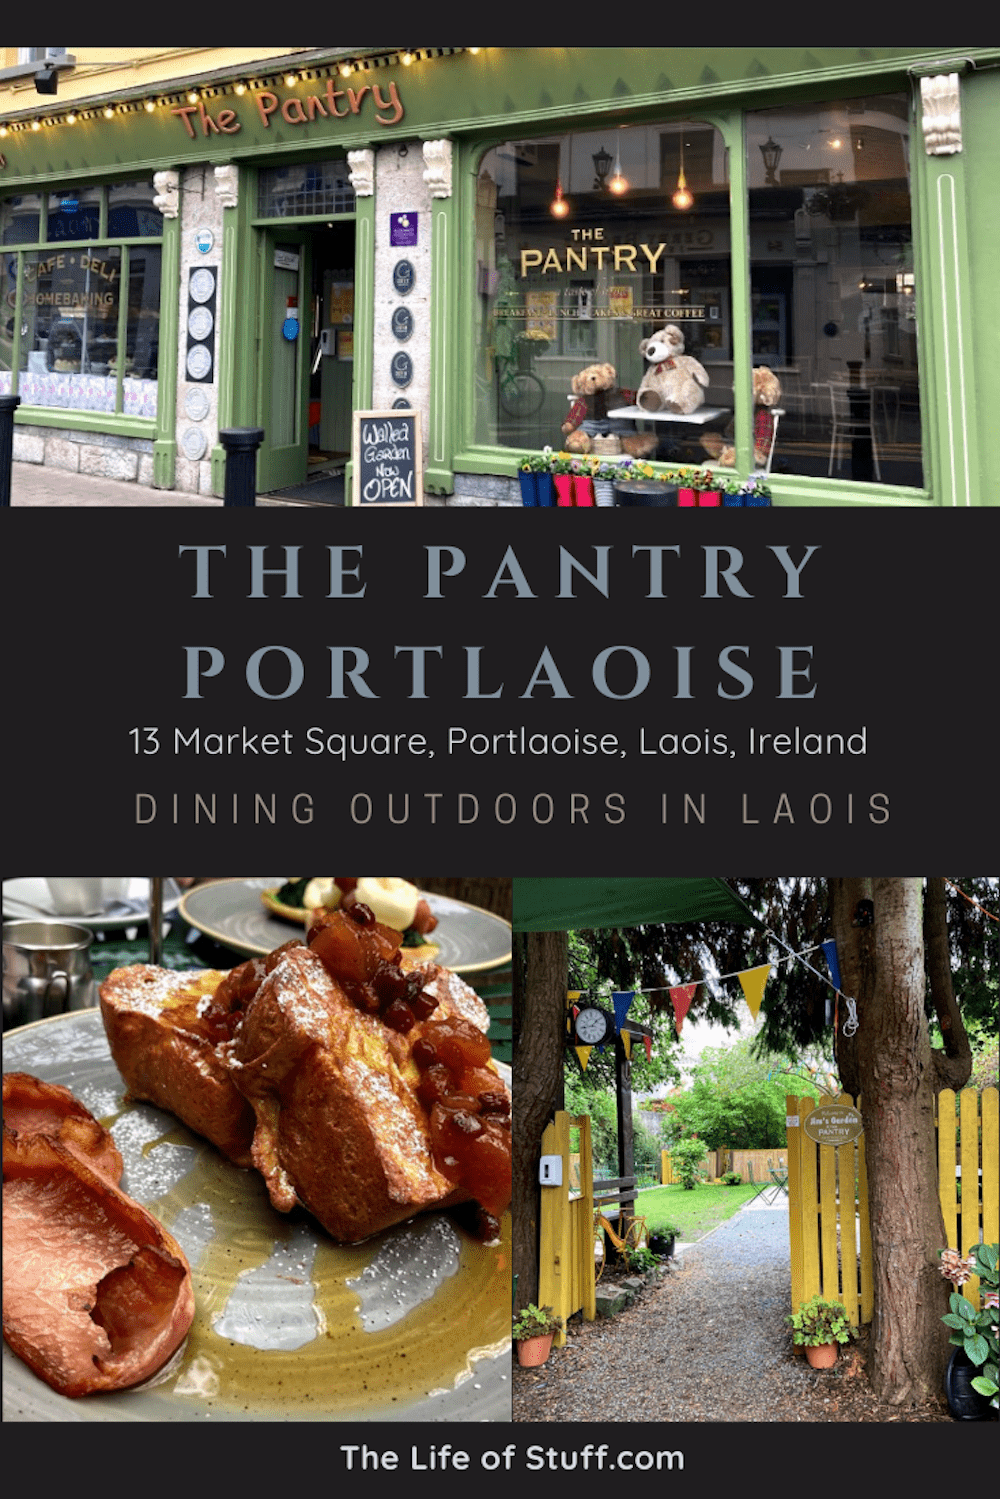 Brunch at The Pantry Portlaoise - Dining Outdoors in Laois - The Life of Stuff